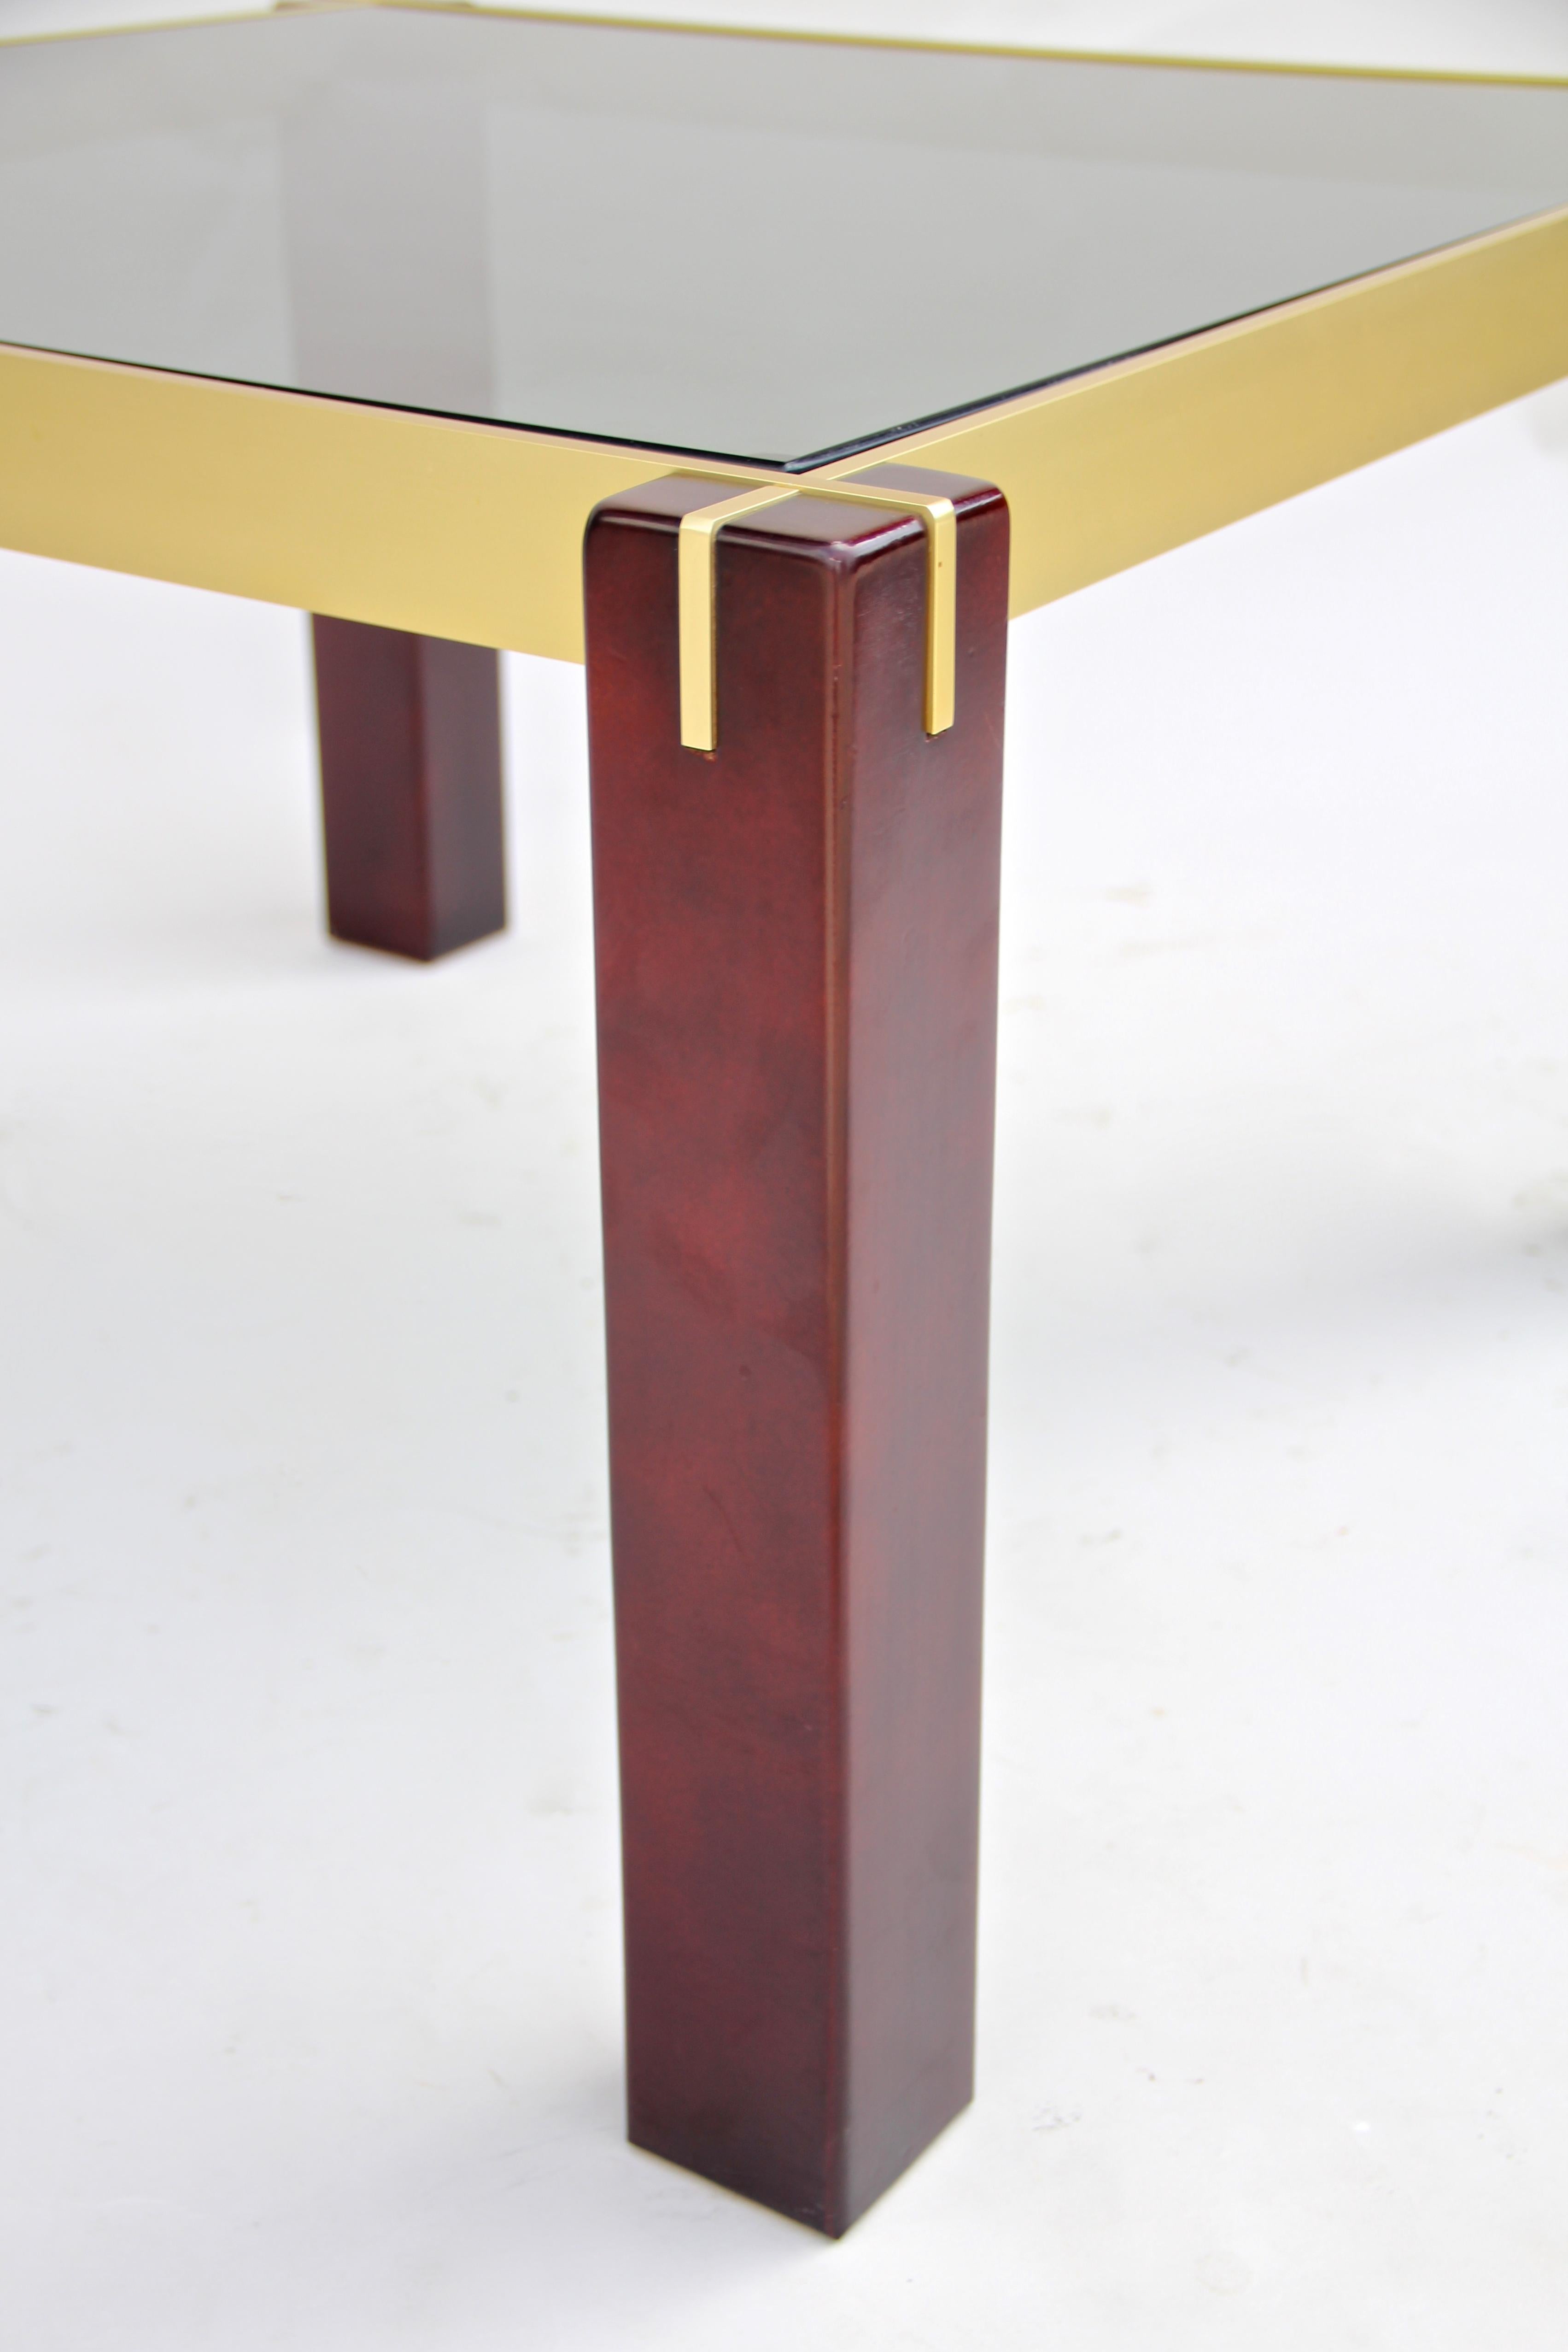 Midcentury Side Table with Brass Bars and Smoked Glass, Italy, circa 1960 For Sale 2